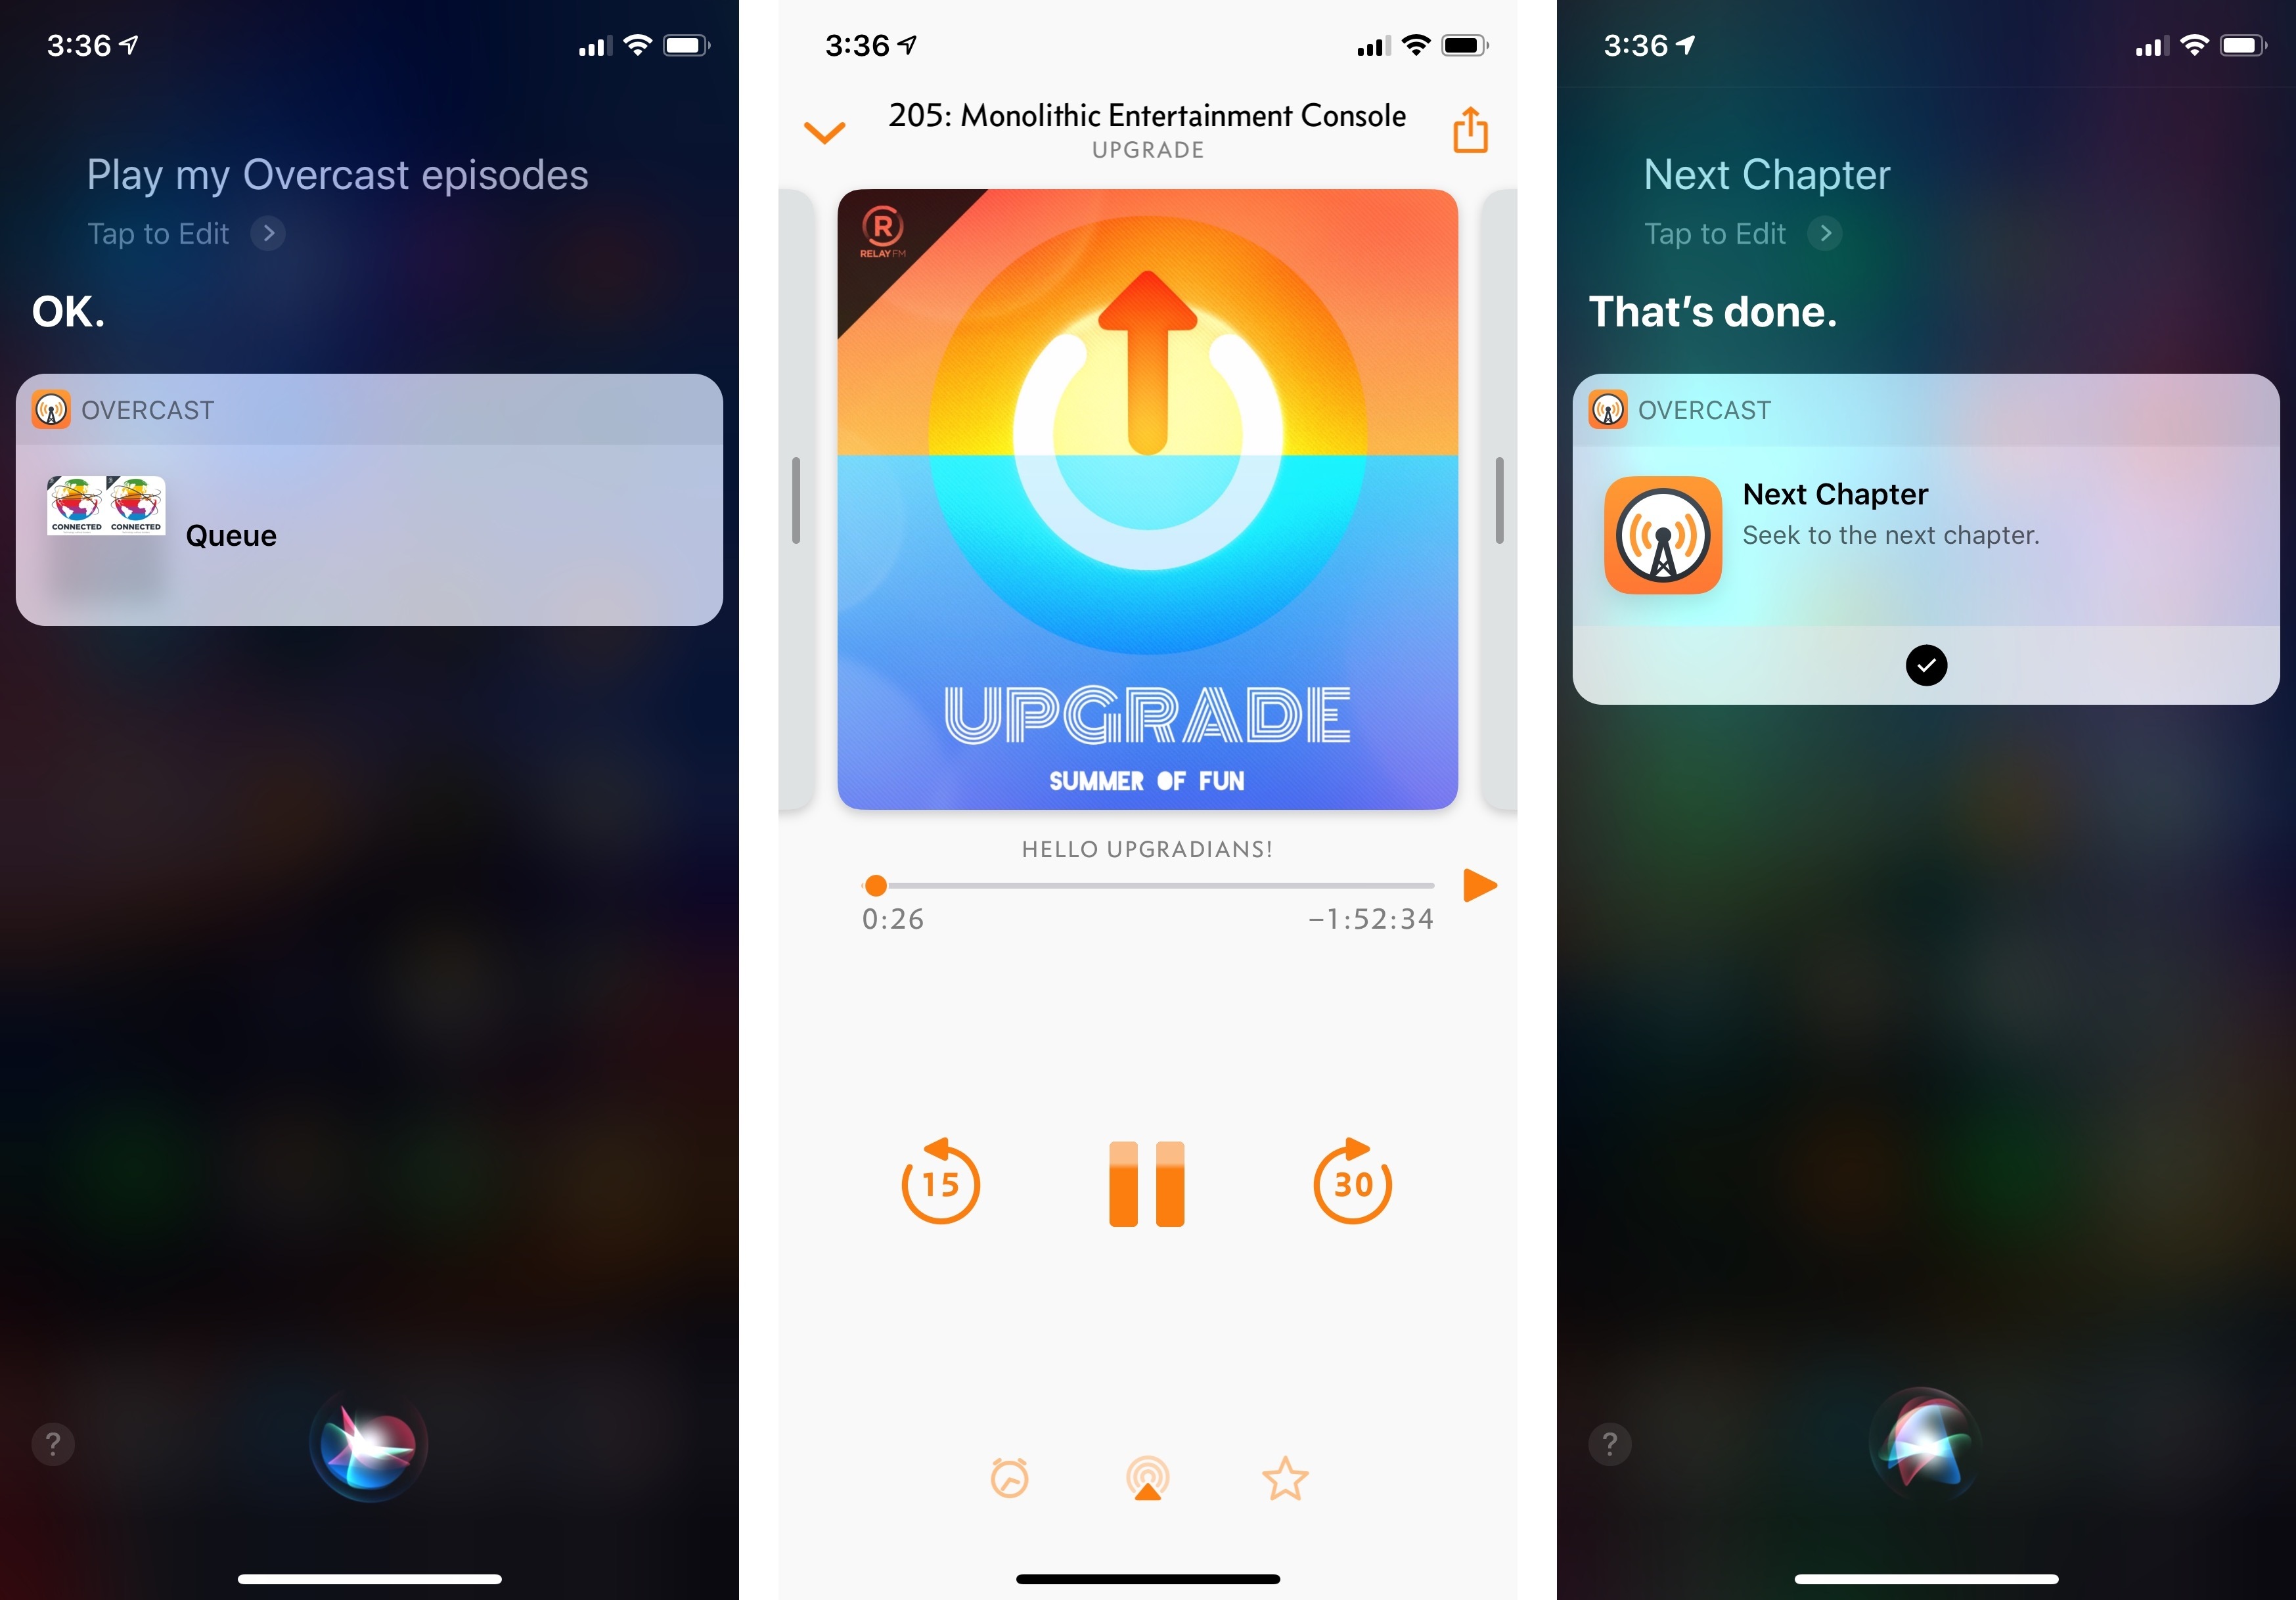 The new media shortcuts for Overcast 5. These shortcuts let you control background playback in Overcast from Siri.